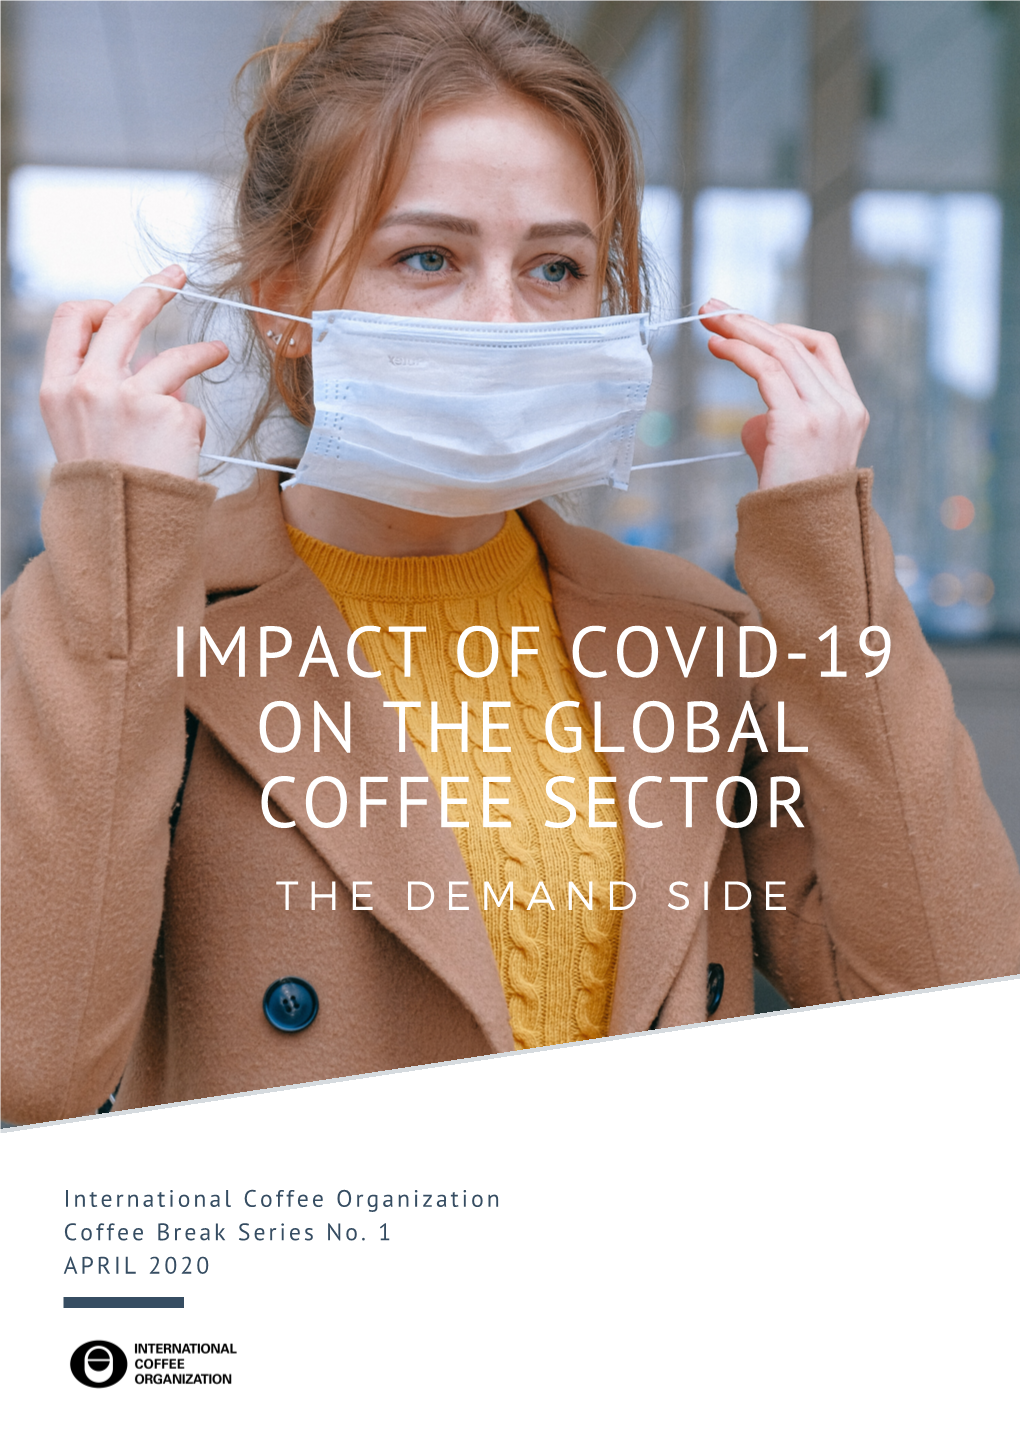 Impact of Covid-19 on the Global Coffee Sector: the Demand Side